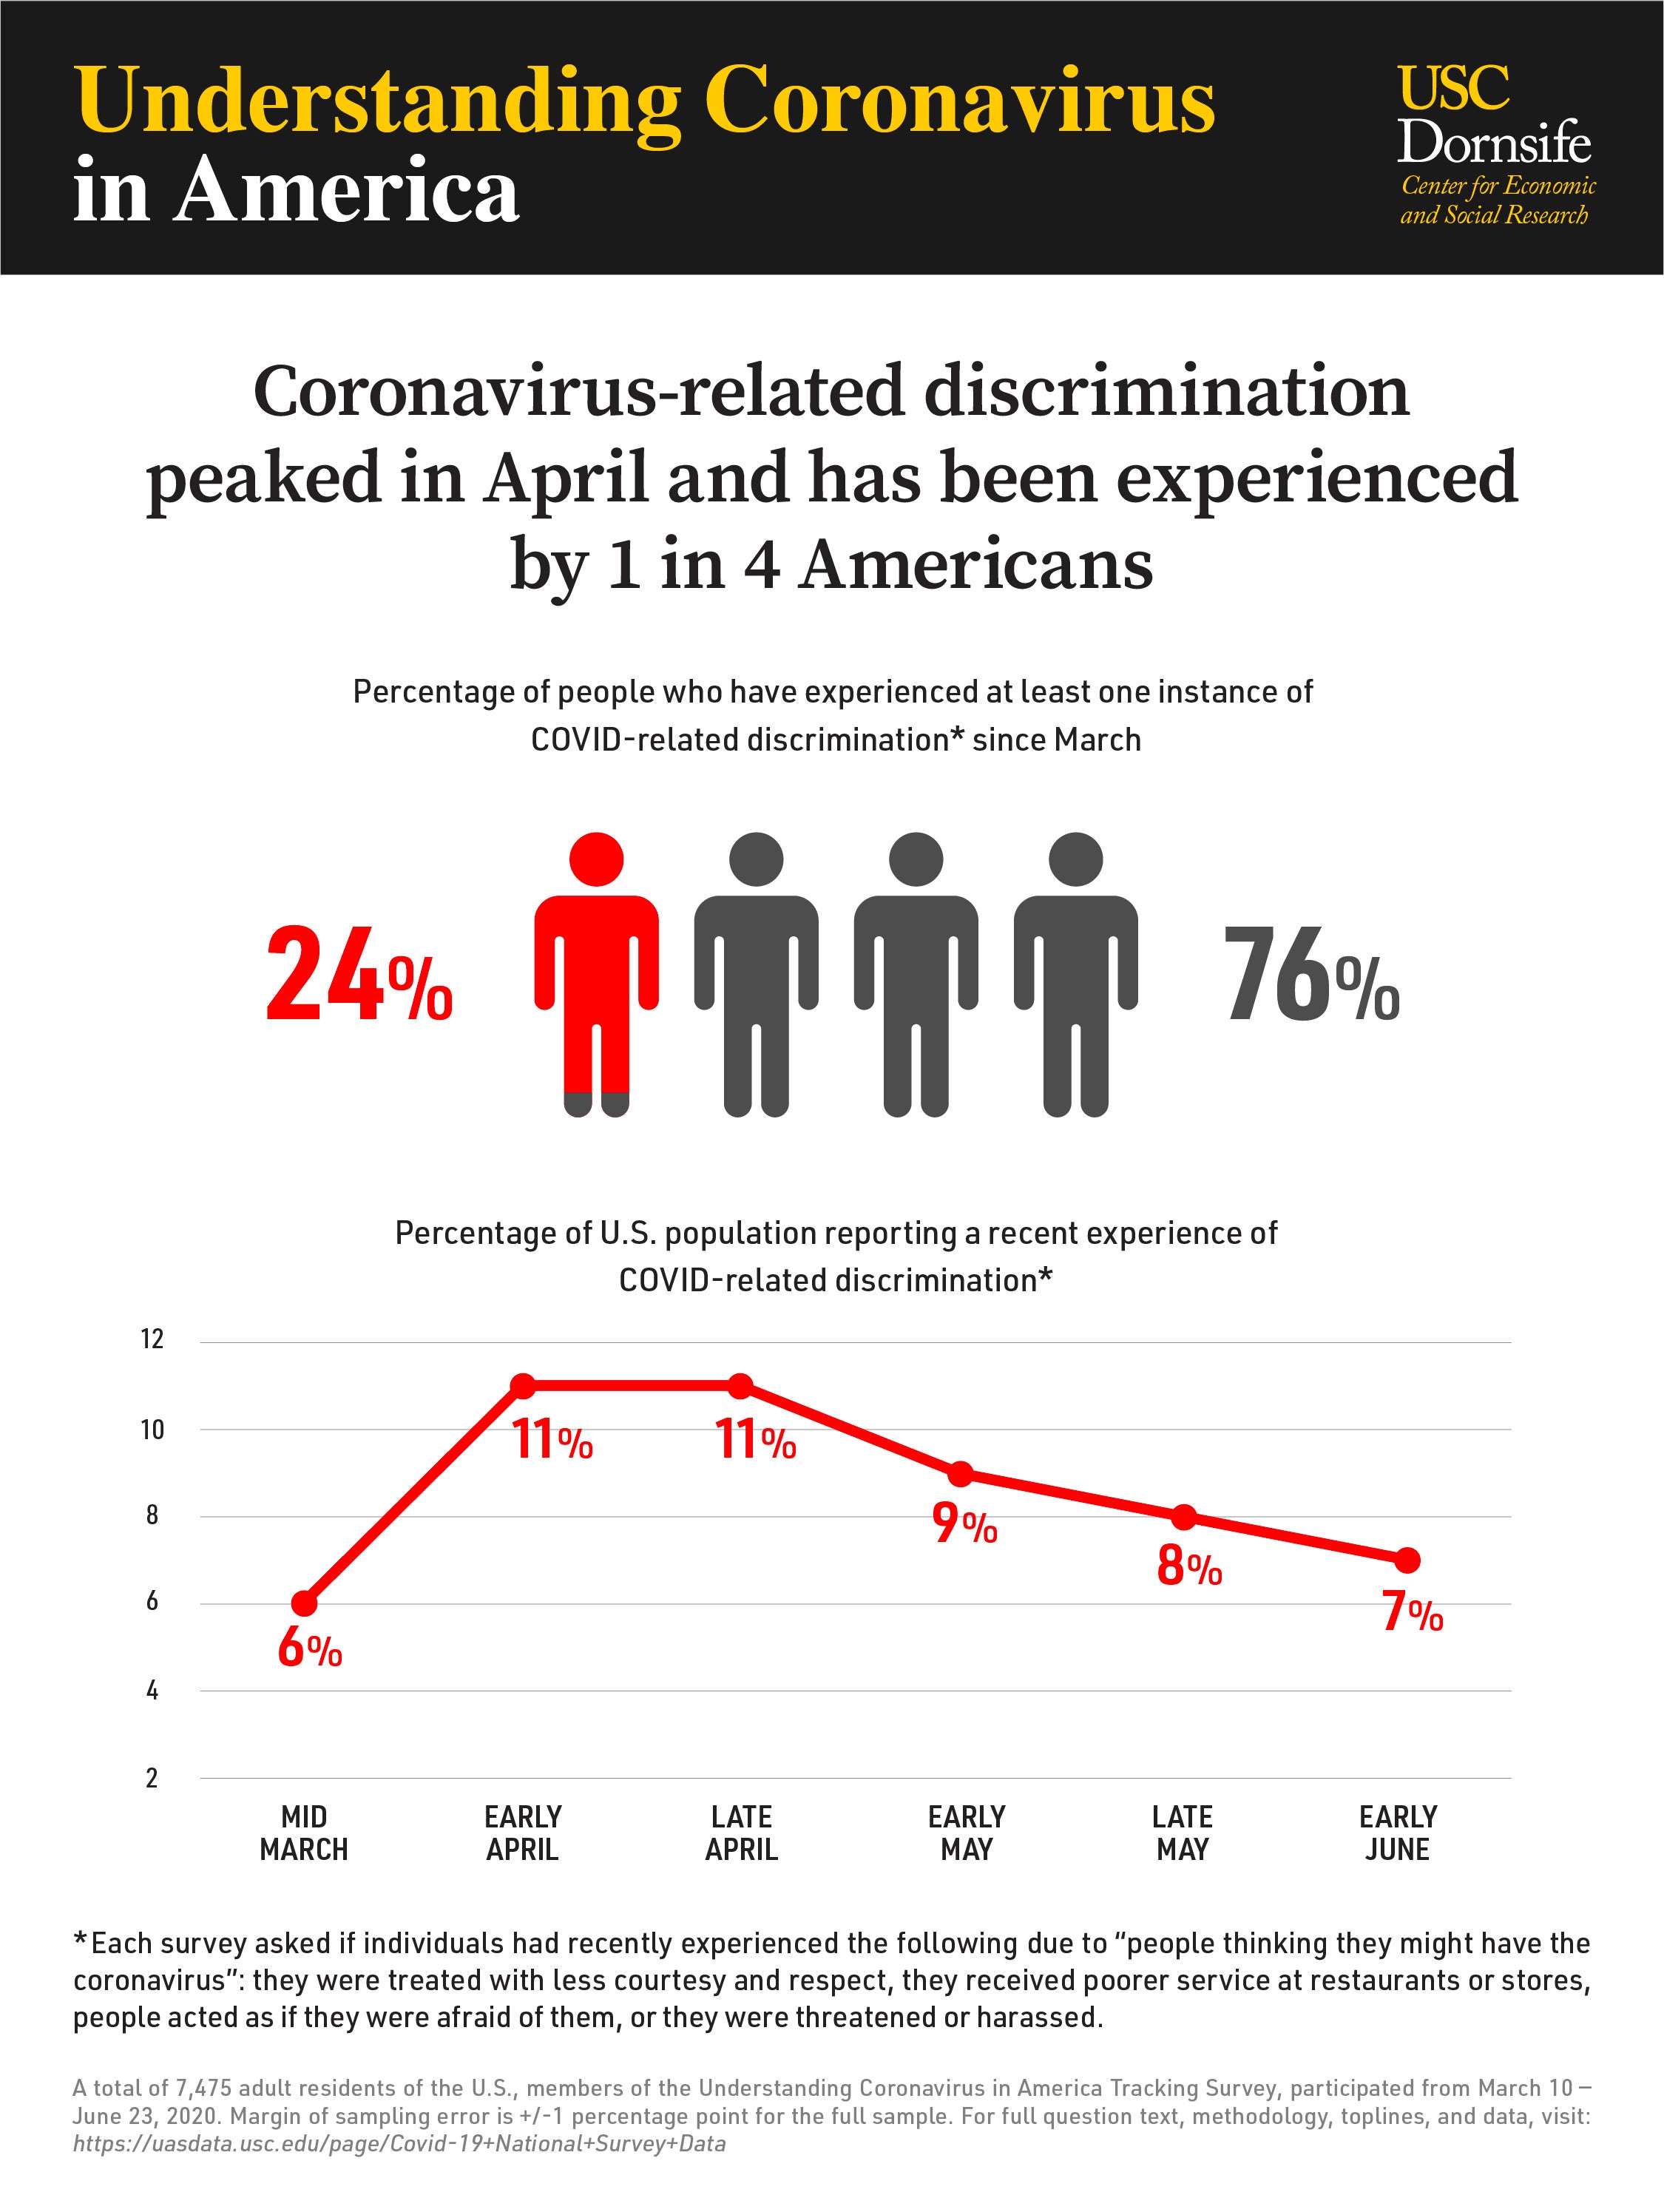 Line graph shows percentage of U.S. population reporting recent COVID-related discrimination rising from 6% in mid-March 2020 to 11% through April and declining steadily to 7% by early June 2020.